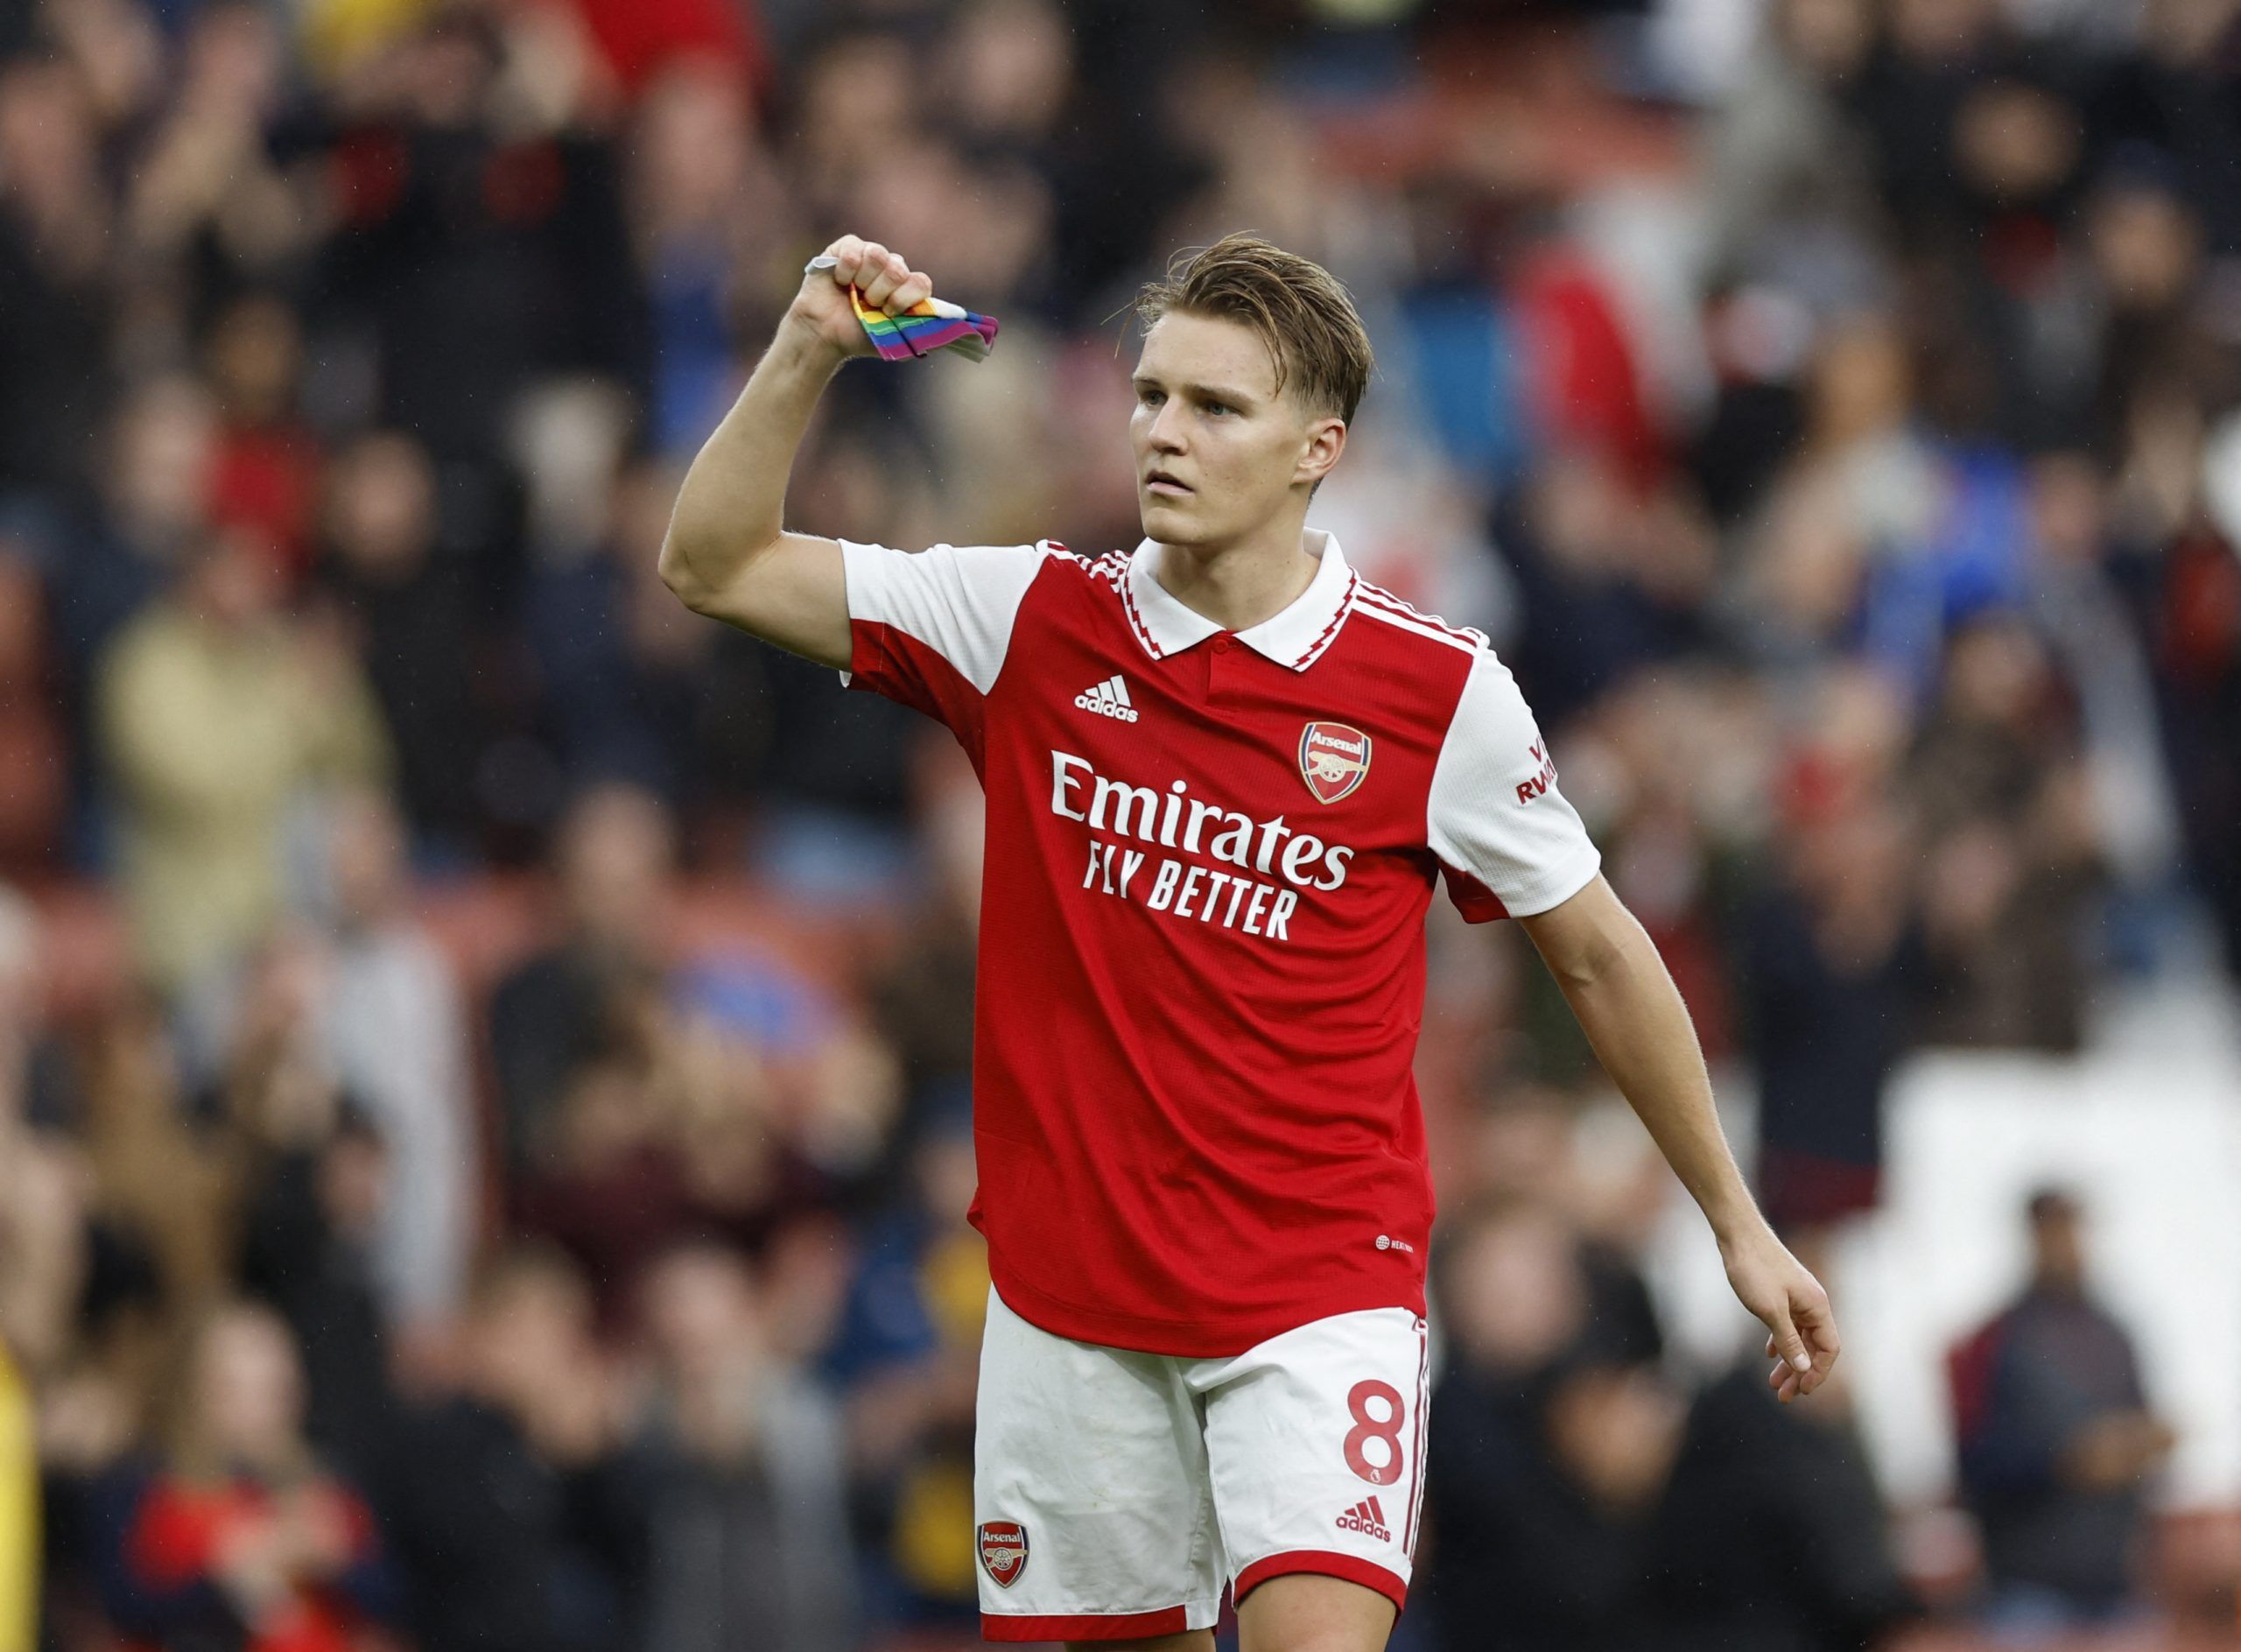 Soccer Football - Premier League - Arsenal v Nottingham Forest - Emirates Stadium, London, Britain - October 30, 2022 Arsenal's Martin Odegaard celebrates after the match Action Images via Reuters/Peter Cziborra EDITORIAL USE ONLY. No use with unauthorized audio, video, data, fixture lists, club/league logos or 'live' services. Online in-match use limited to 75 images, no video emulation. No use in betting, games or single club /league/player publications.  Please contact your account representa